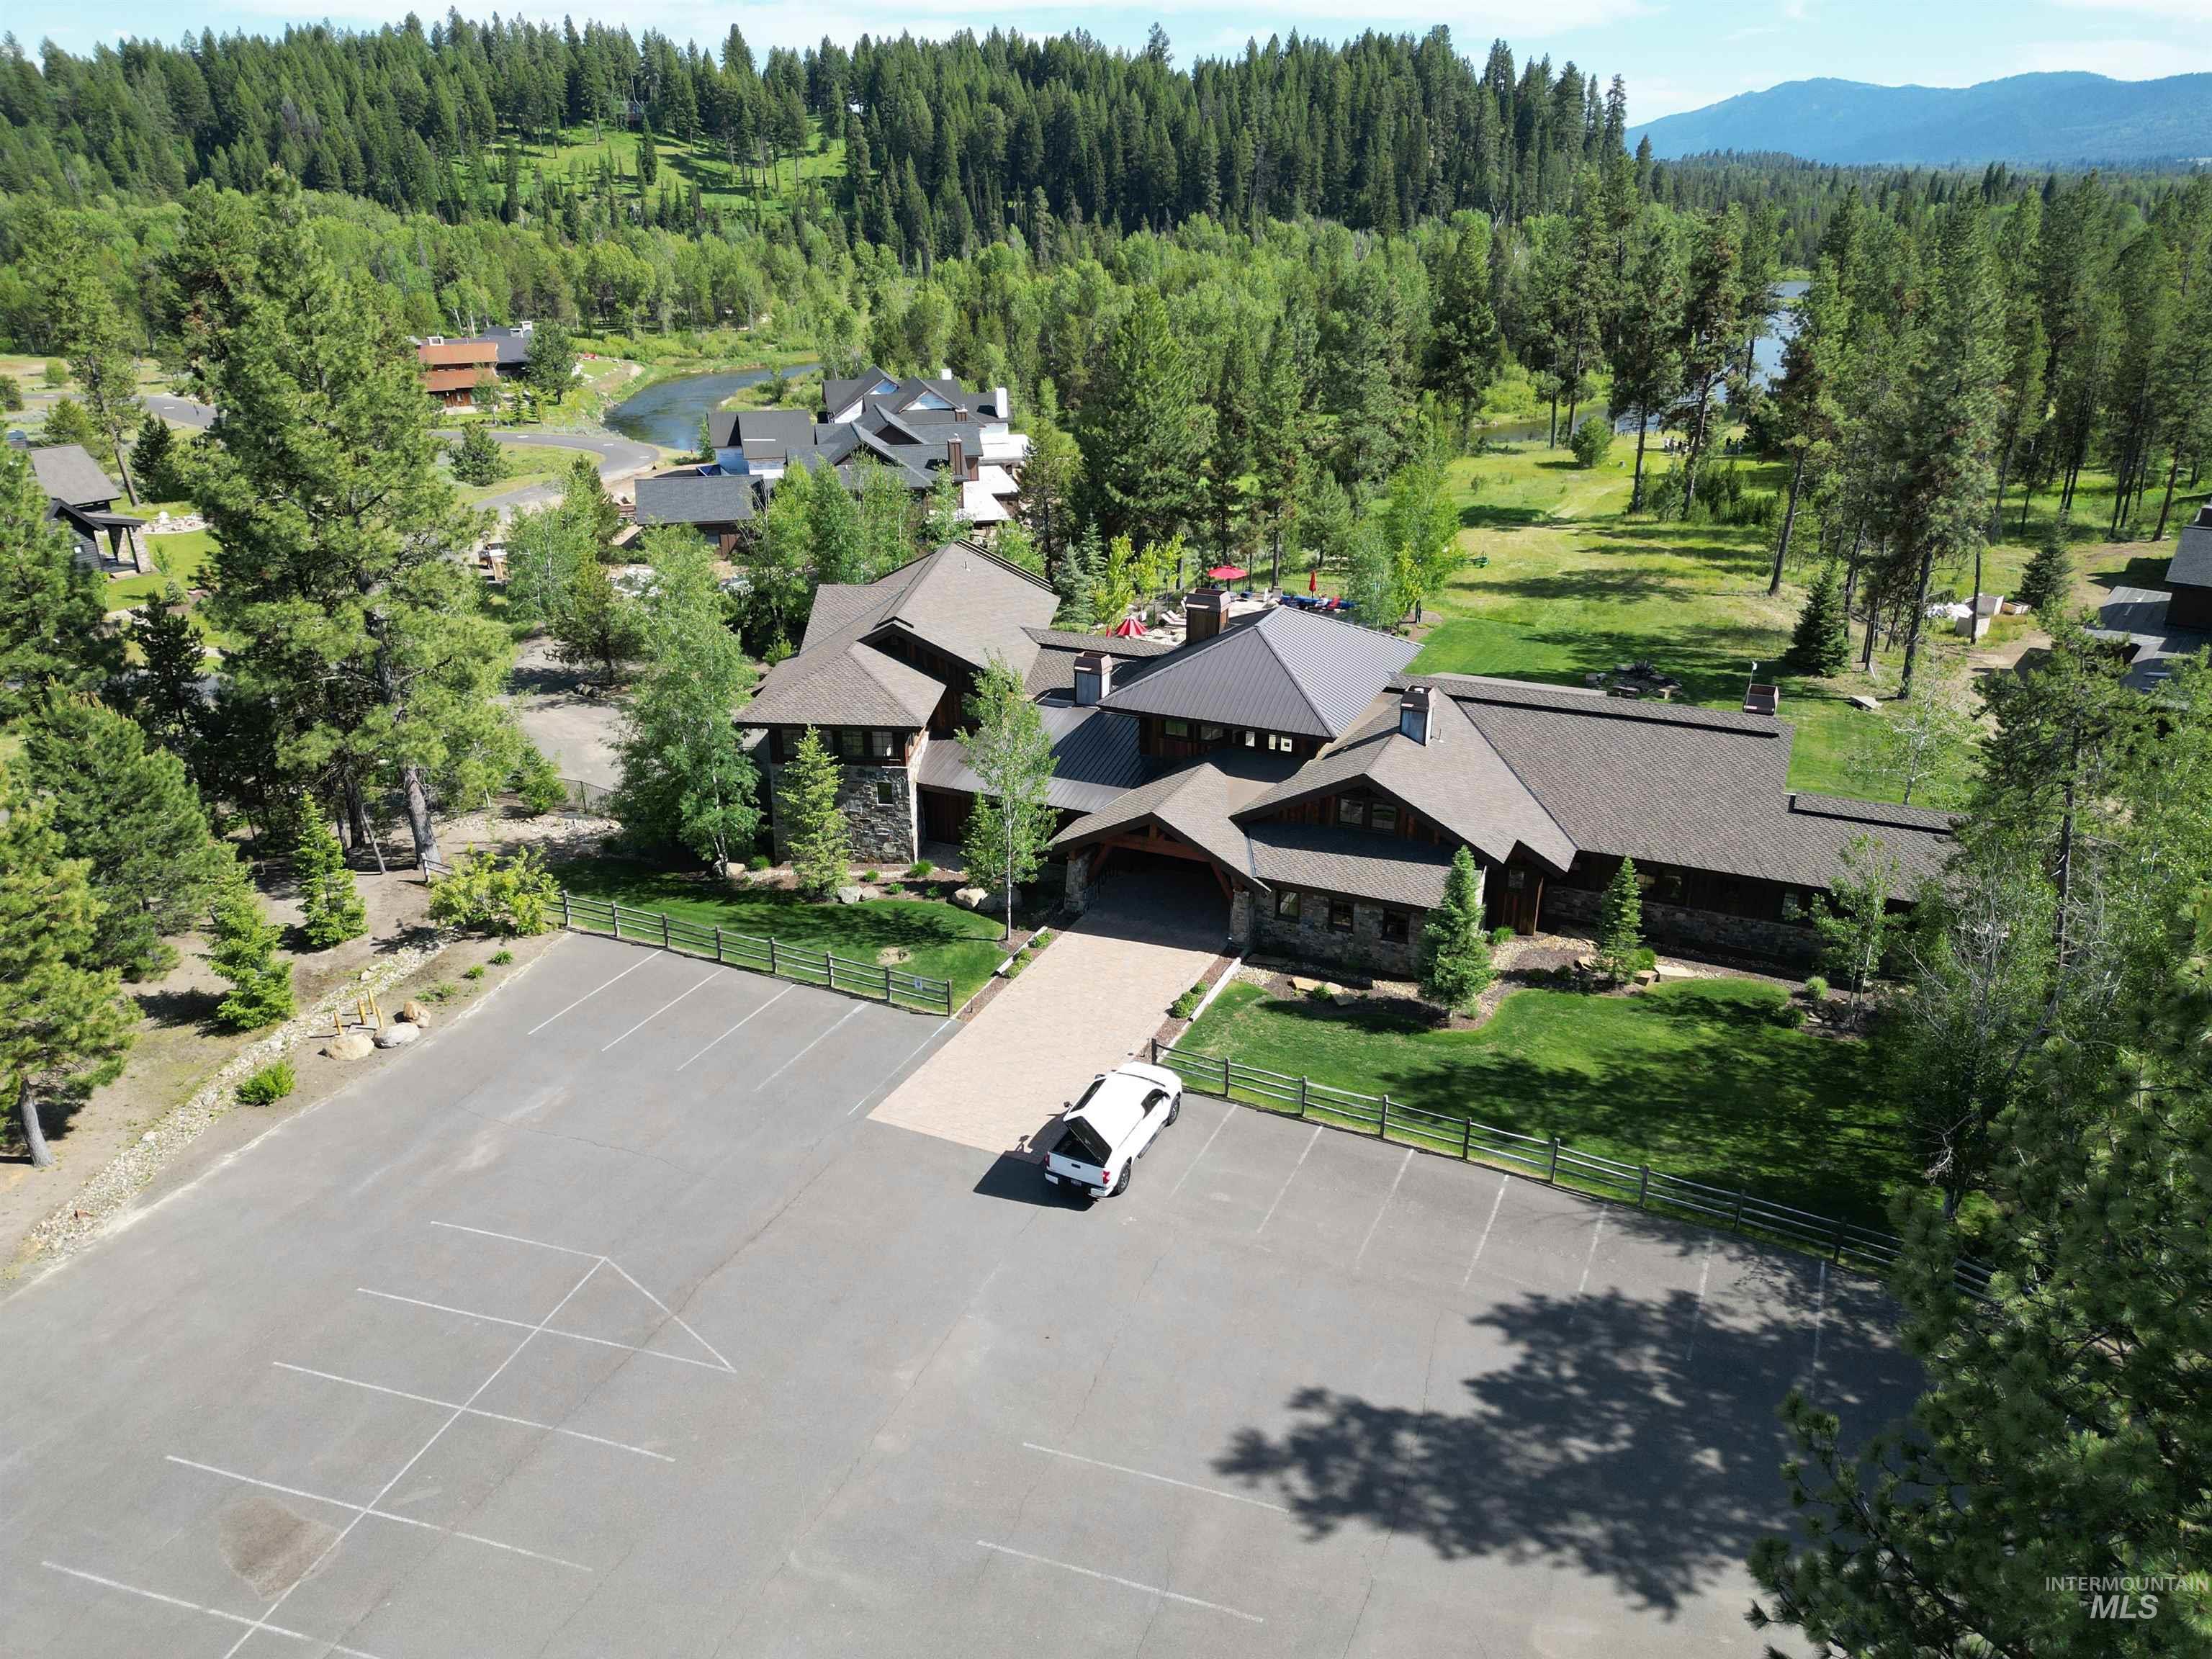 15 Meadowbright Dr., McCall, Idaho 83638, Land For Sale, Price $220,000,MLS 98915575